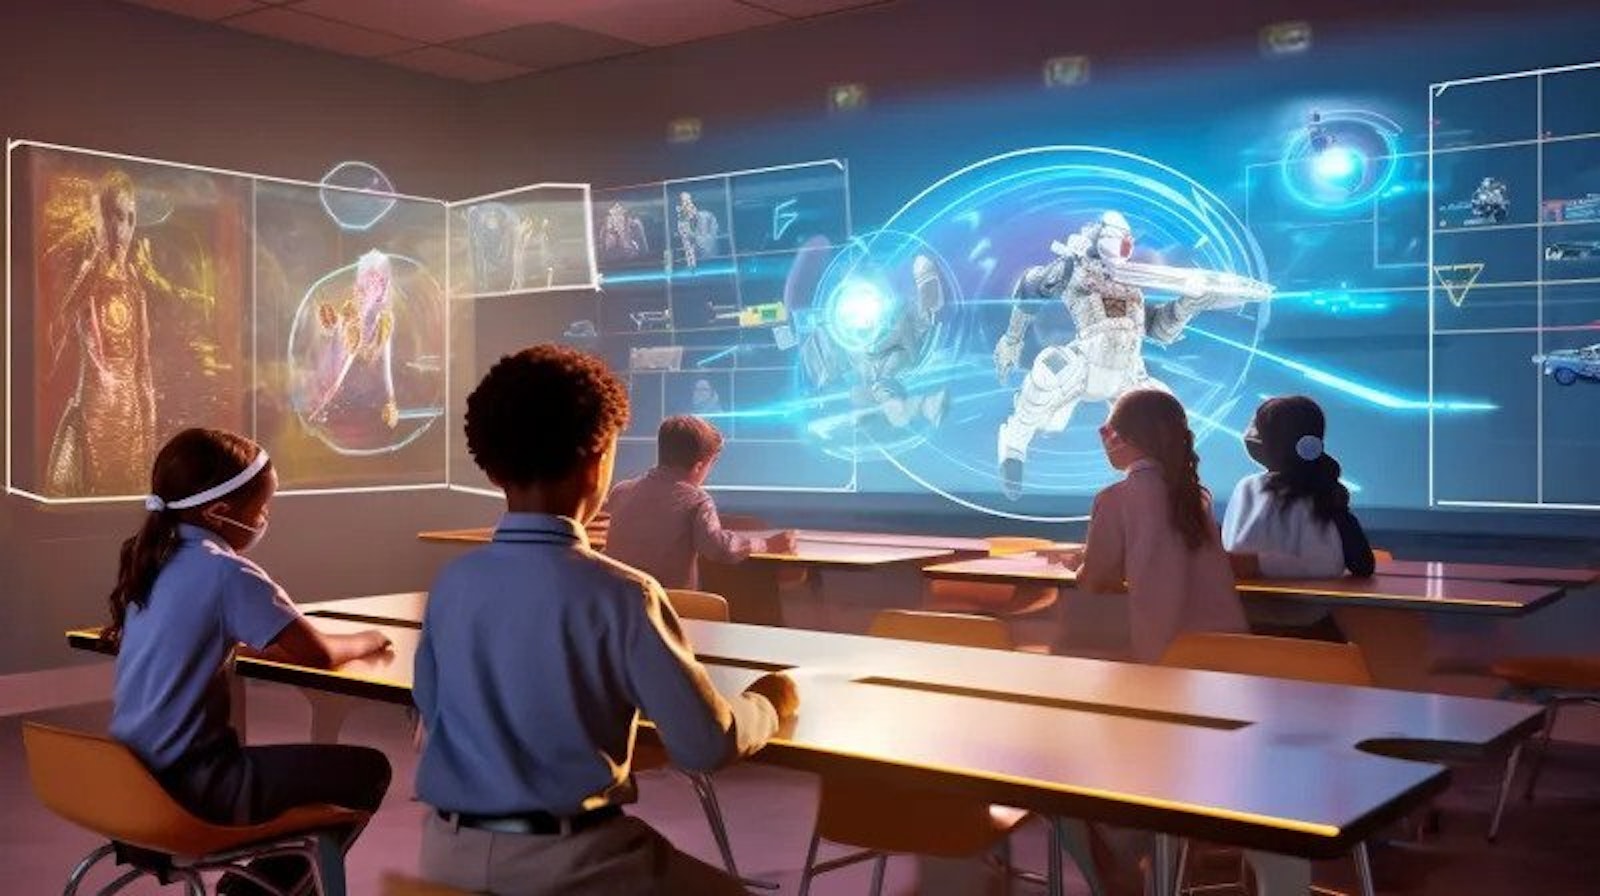 An image created for this article using Midjourney, a popular text-to-image artificial intelligence platform, shows a teacher instructing students in a futuristic environment. All images created for this article are original to the story, created using artificial intelligence. (Artificial intelligence-created image courtesy of Notre Dame Preparatory and Marist Academy)